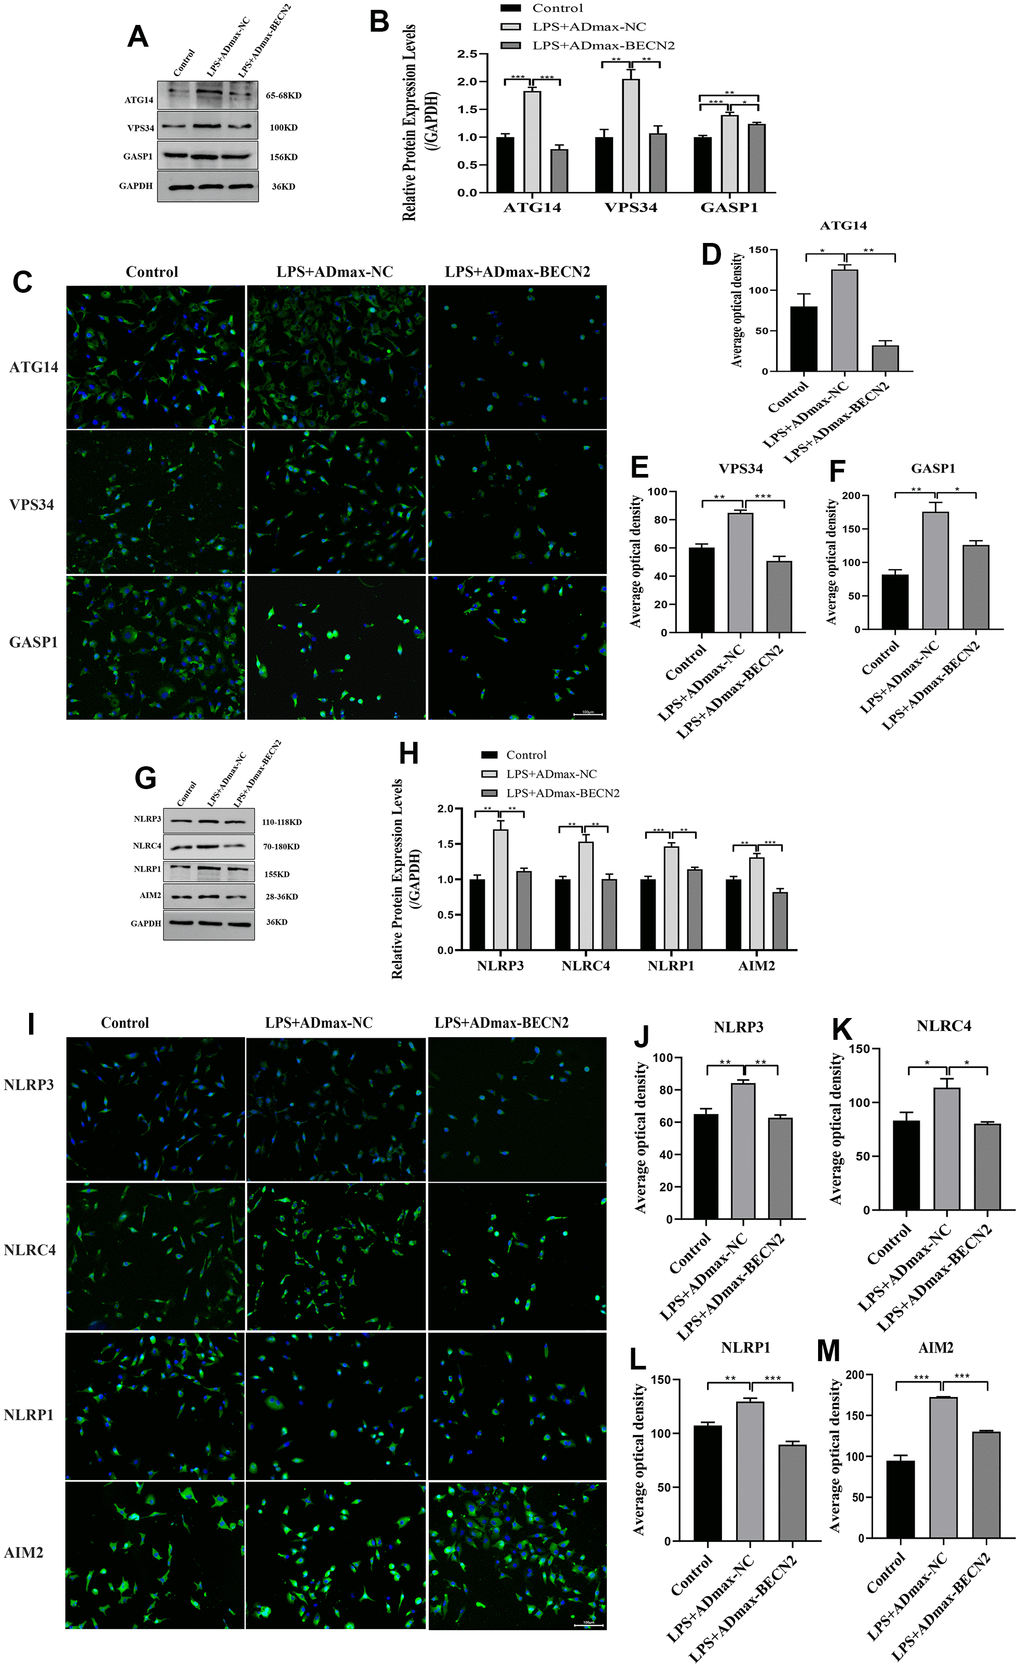 Increased BECN2 attenuated the autophagy and inflammation of LPS-induced ATDC5 degeneration. (A) Western blot was employed to detect the expression of ATG14, VPS34 and GASP1. (B) The protein expression of ATG14, VPS34 and GASP1 were determined using ImageJ software, GAPDH was used as the internal control, respectively (n=3). (C) ATG14, VPS34 and GASP1 expression were determined by immunofluorescence staining (scale bar: 100μm). (D–F) Average optical density was calculated by ImageJ software. (G) Western blot was employed to detect the expression of NLRP3, NLRC4, NLRP1 and AIM2. (H) The protein expression of NLRP3, NLRC4, NLRP1 and AIM2 were determined using ImageJ software, GAPDH was used as the internal control, respectively (n=3). (I) NLRP3, NLRC4, NLRP1 and AIM2 expression were determined by immunofluorescence staining (scale bar: 100μm). (J–M) Average optical density was calculated by ImageJ software. All data represent mean ± SD. All in vitro experiments were repeated three times independently. * p p p 